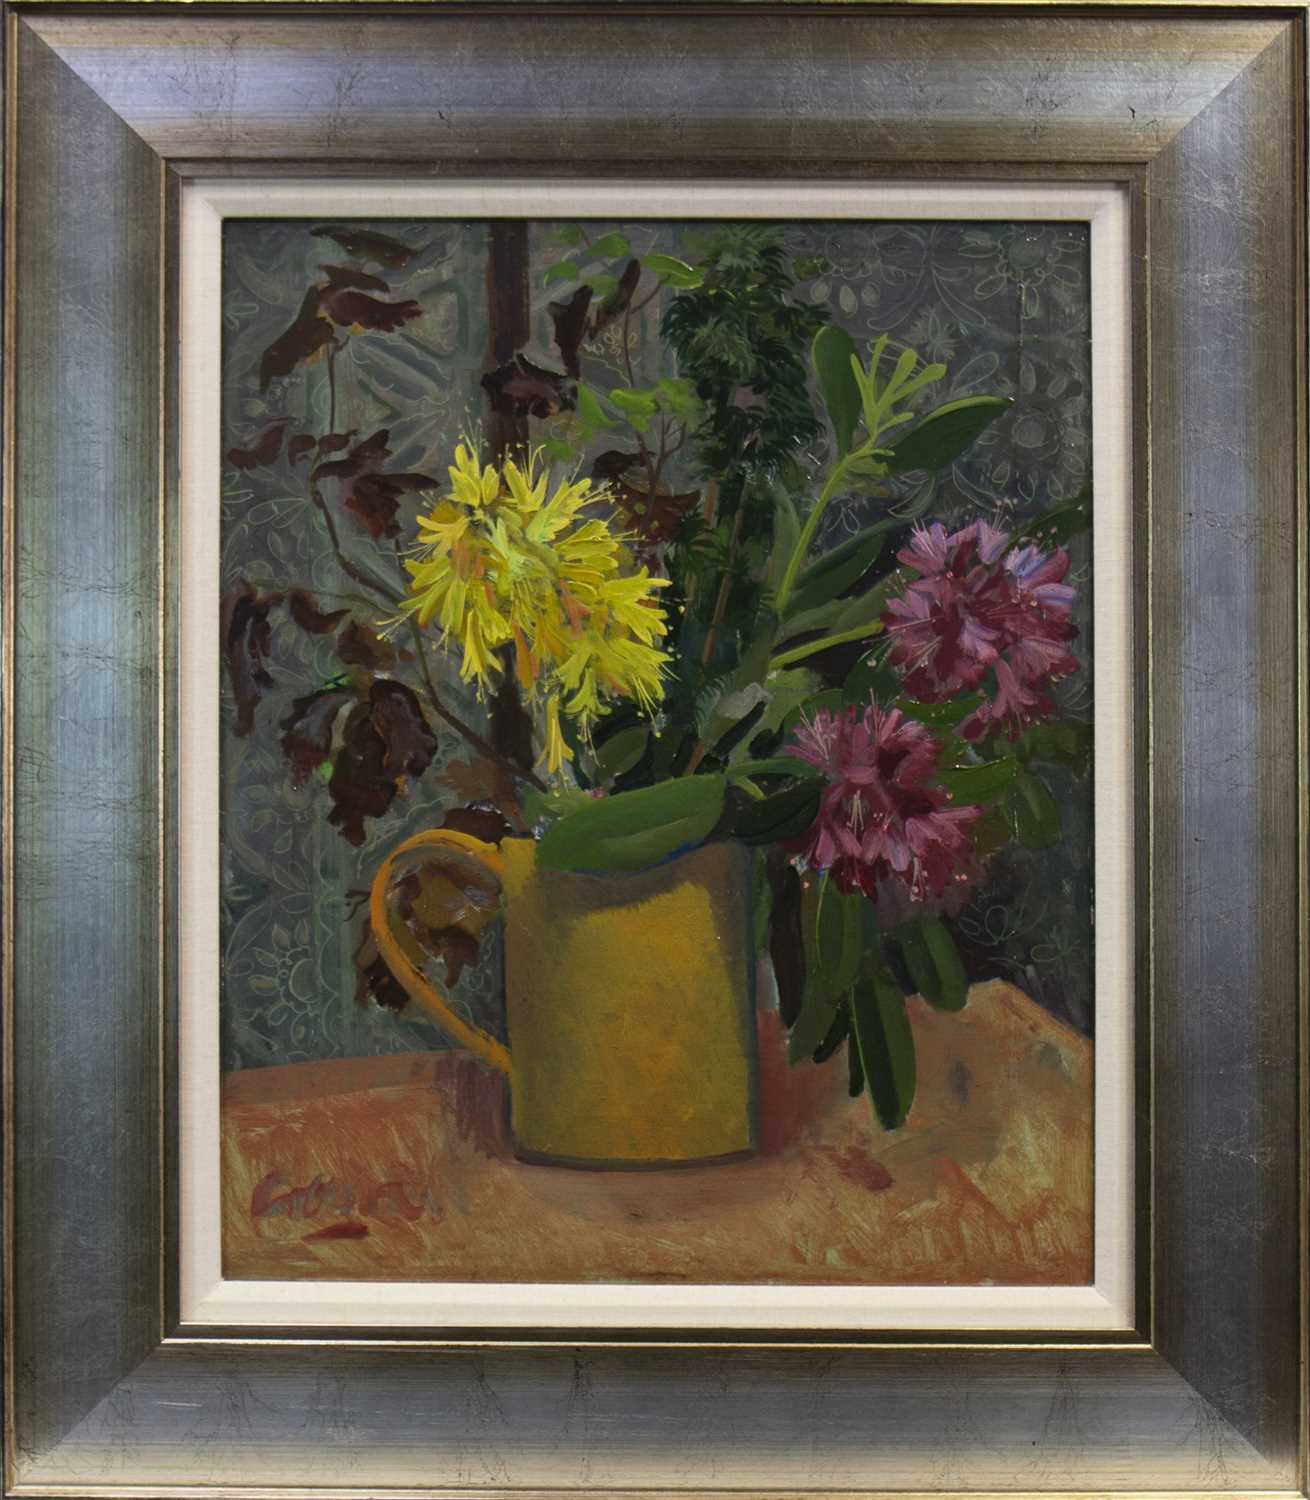 Lot 750 - YELLOW AND CRIMSON FLOWERS, AN OIL BY WILLIAM CROSBIE